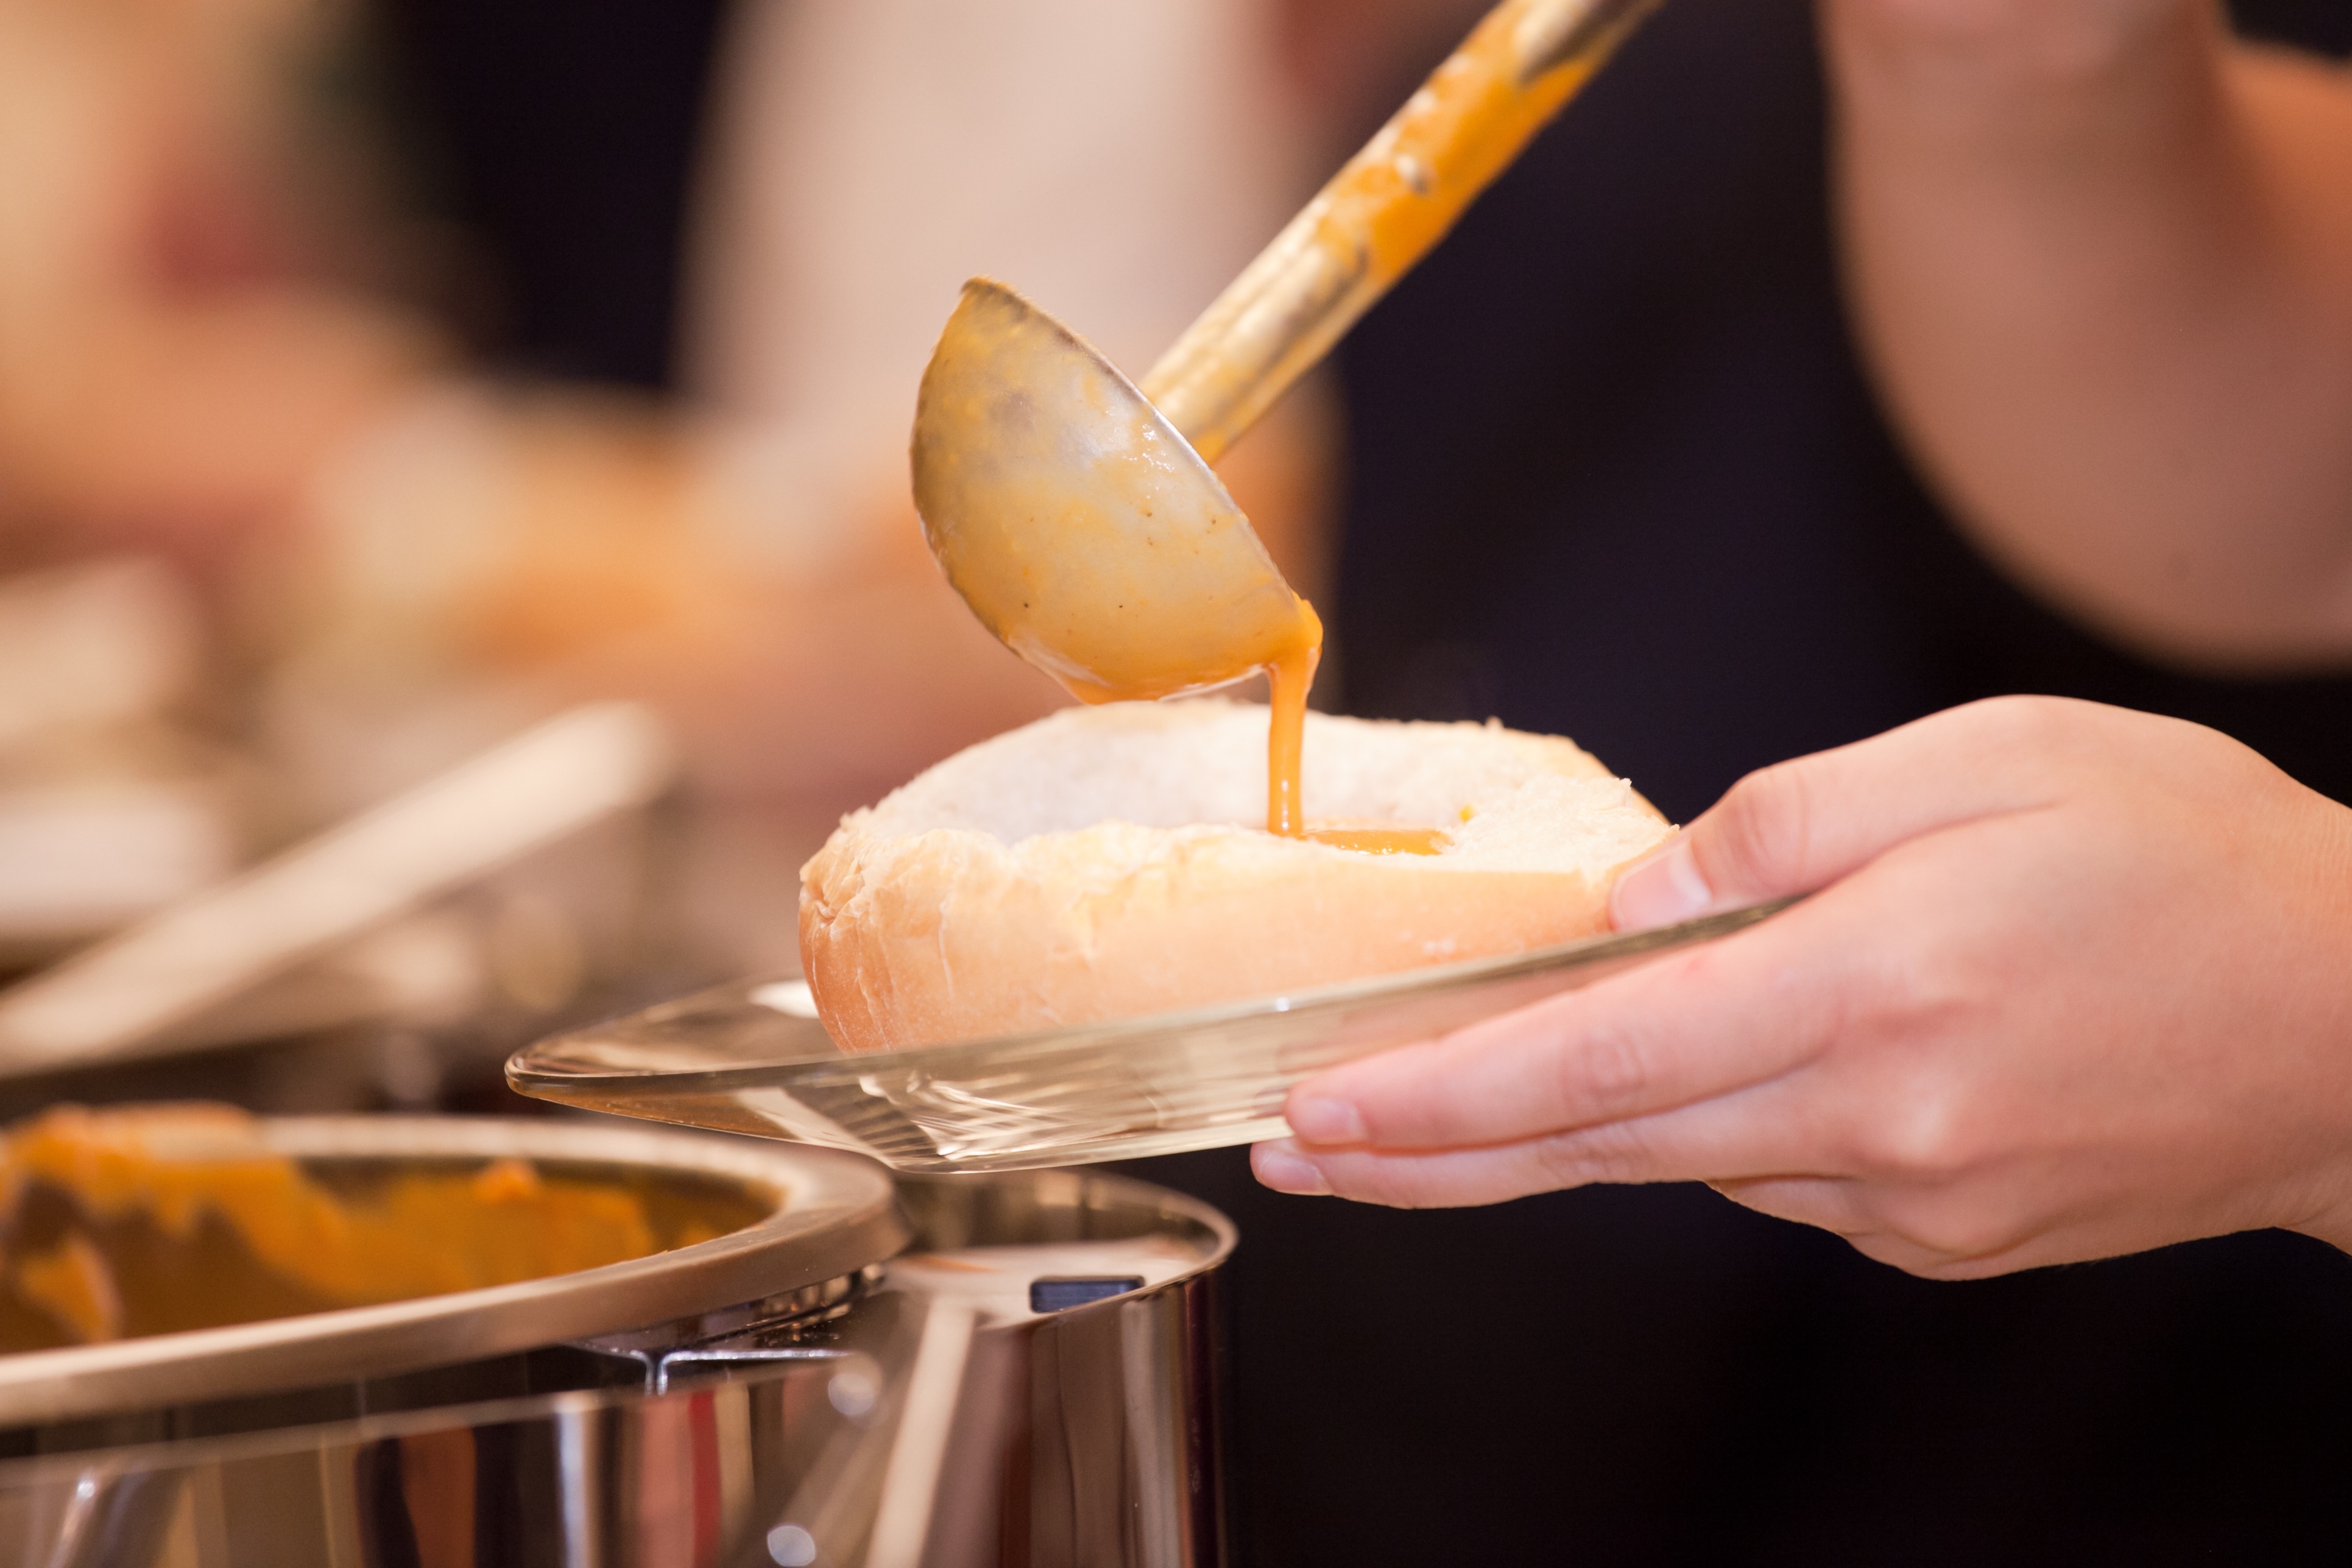 soup being poured into a bread bowl